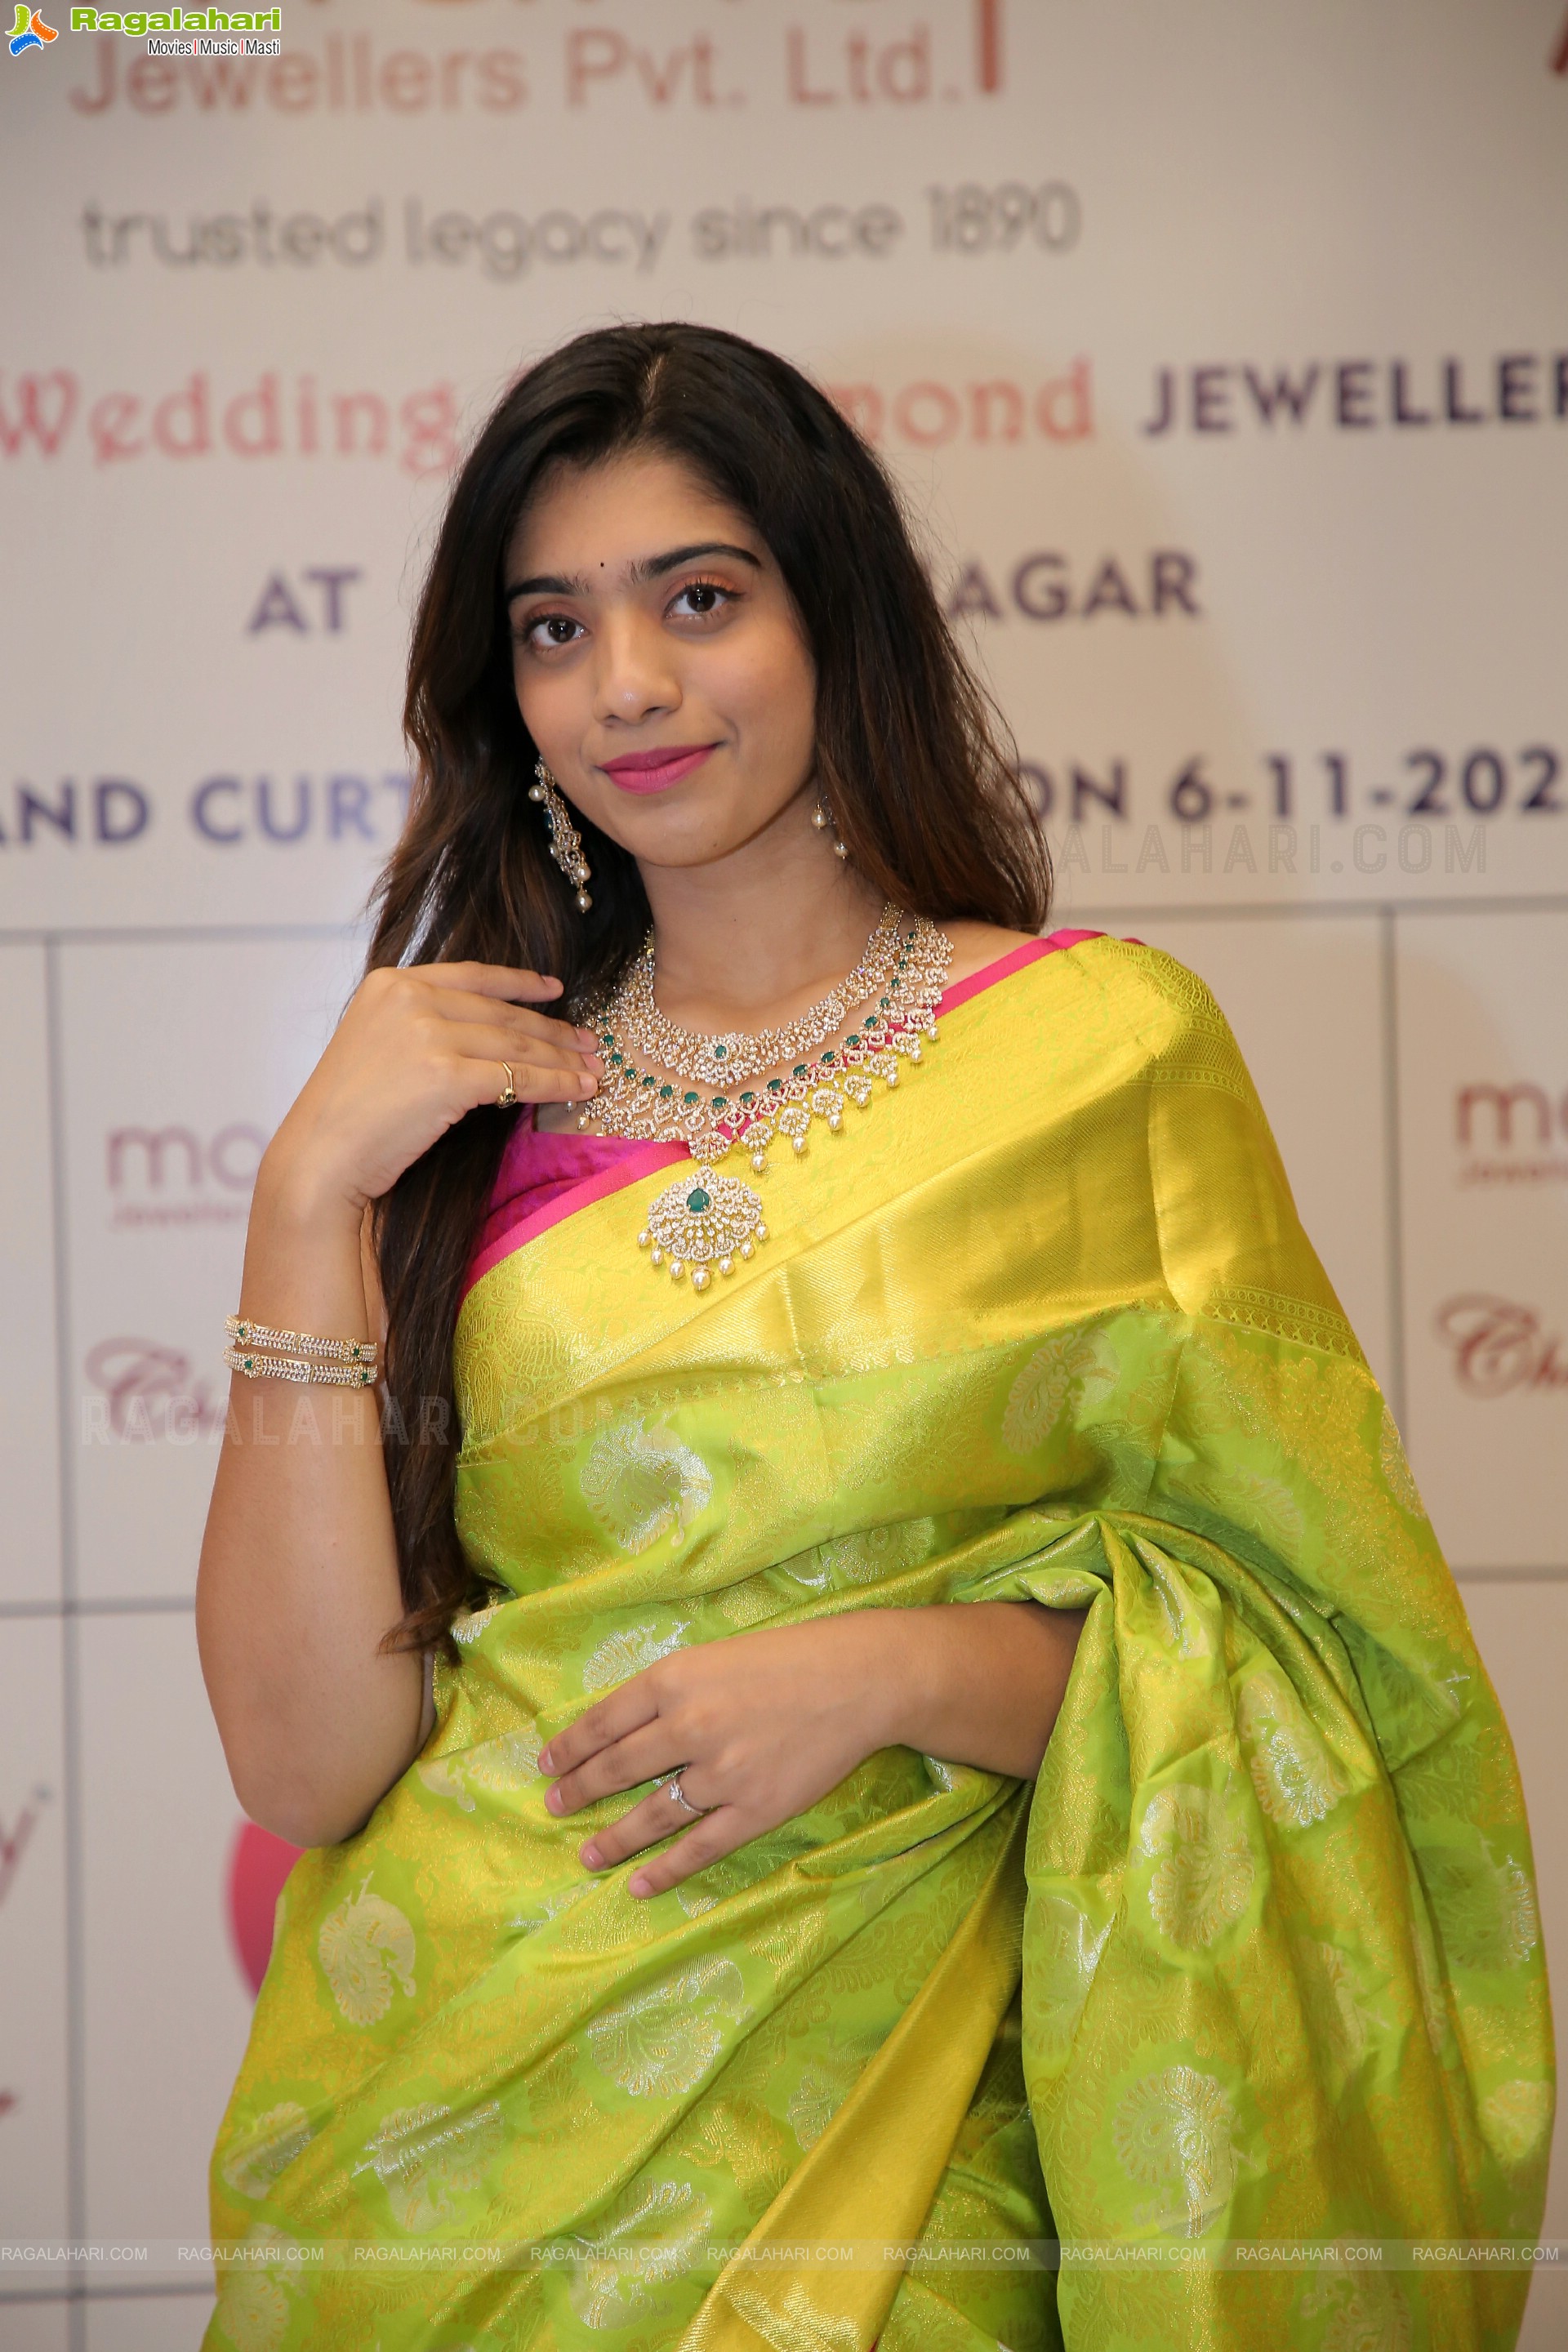 Manepally Jewellers Announces Its 5th Branch and Jewellery Showcase